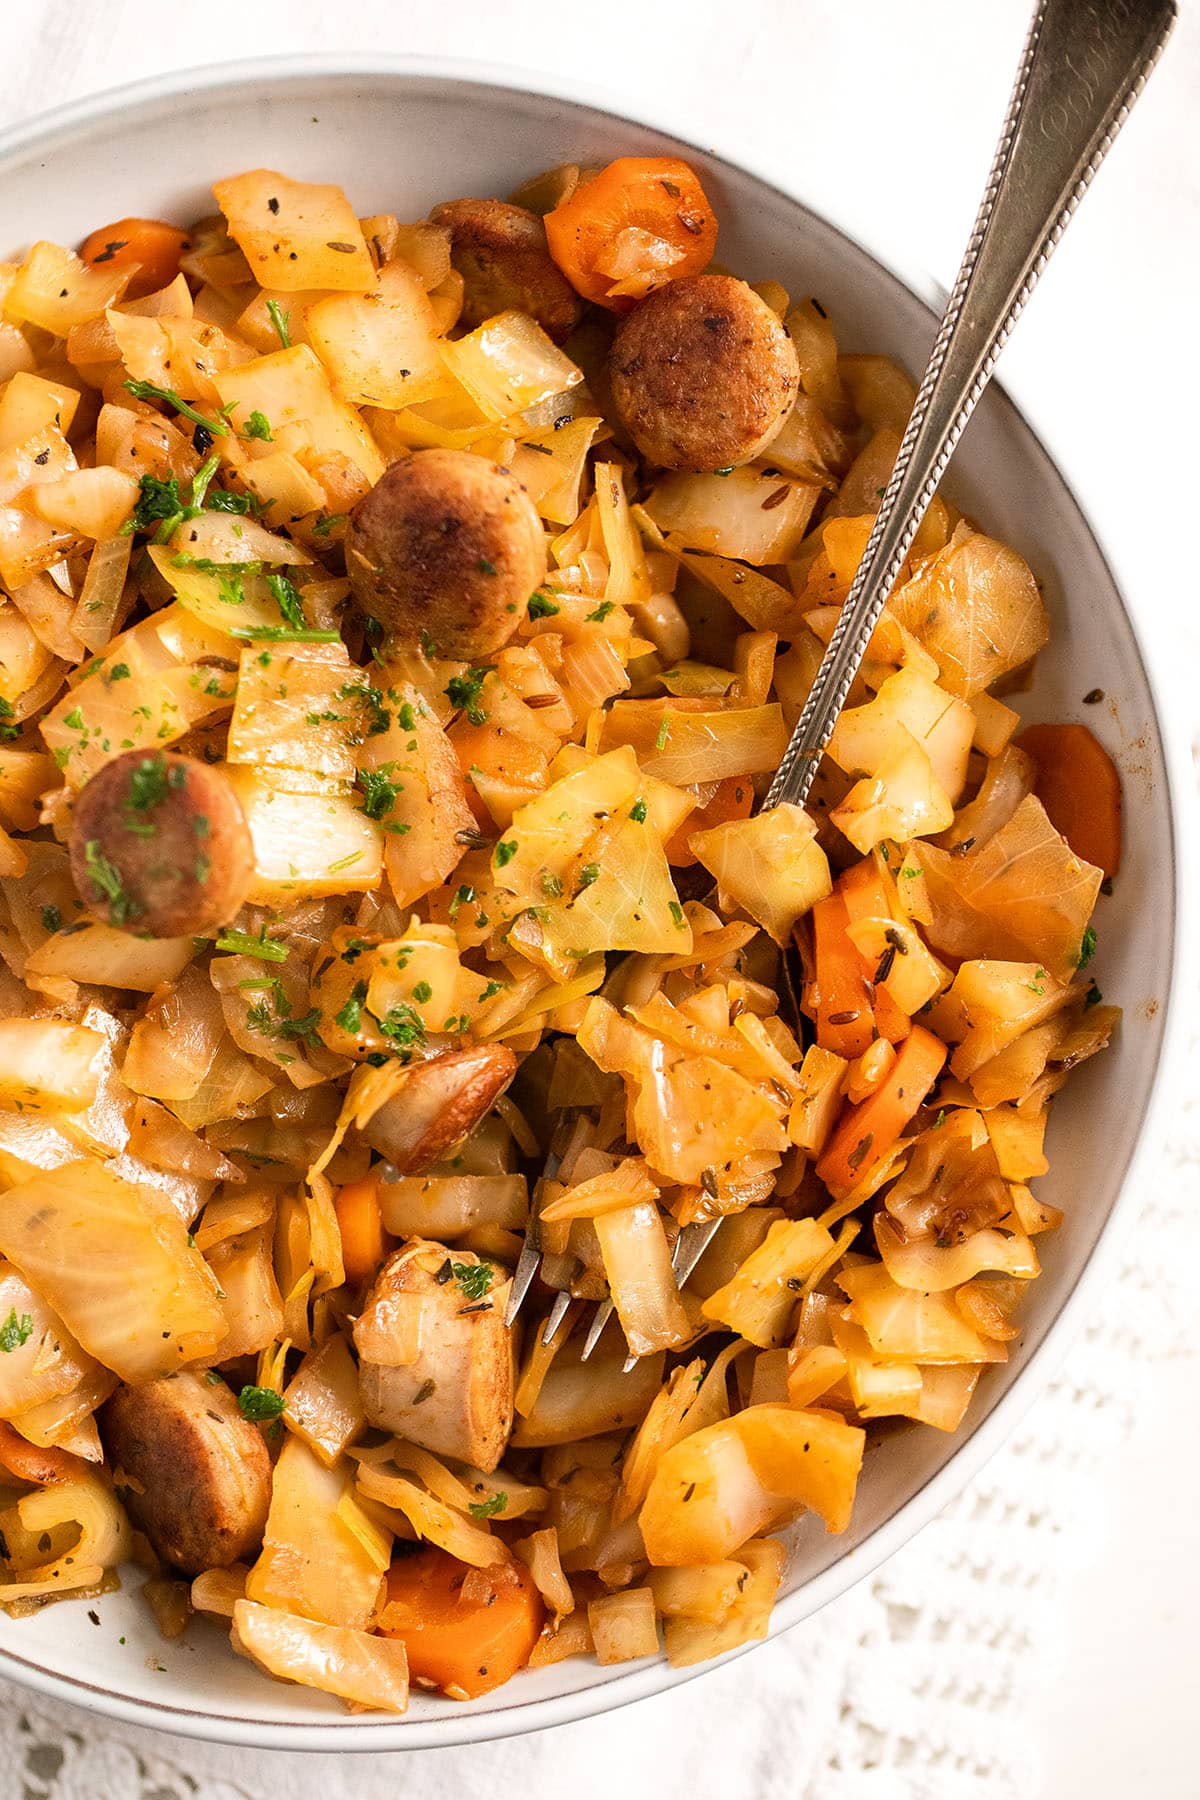 bowl with fried cabbage and sausages sprinkled with parsley.